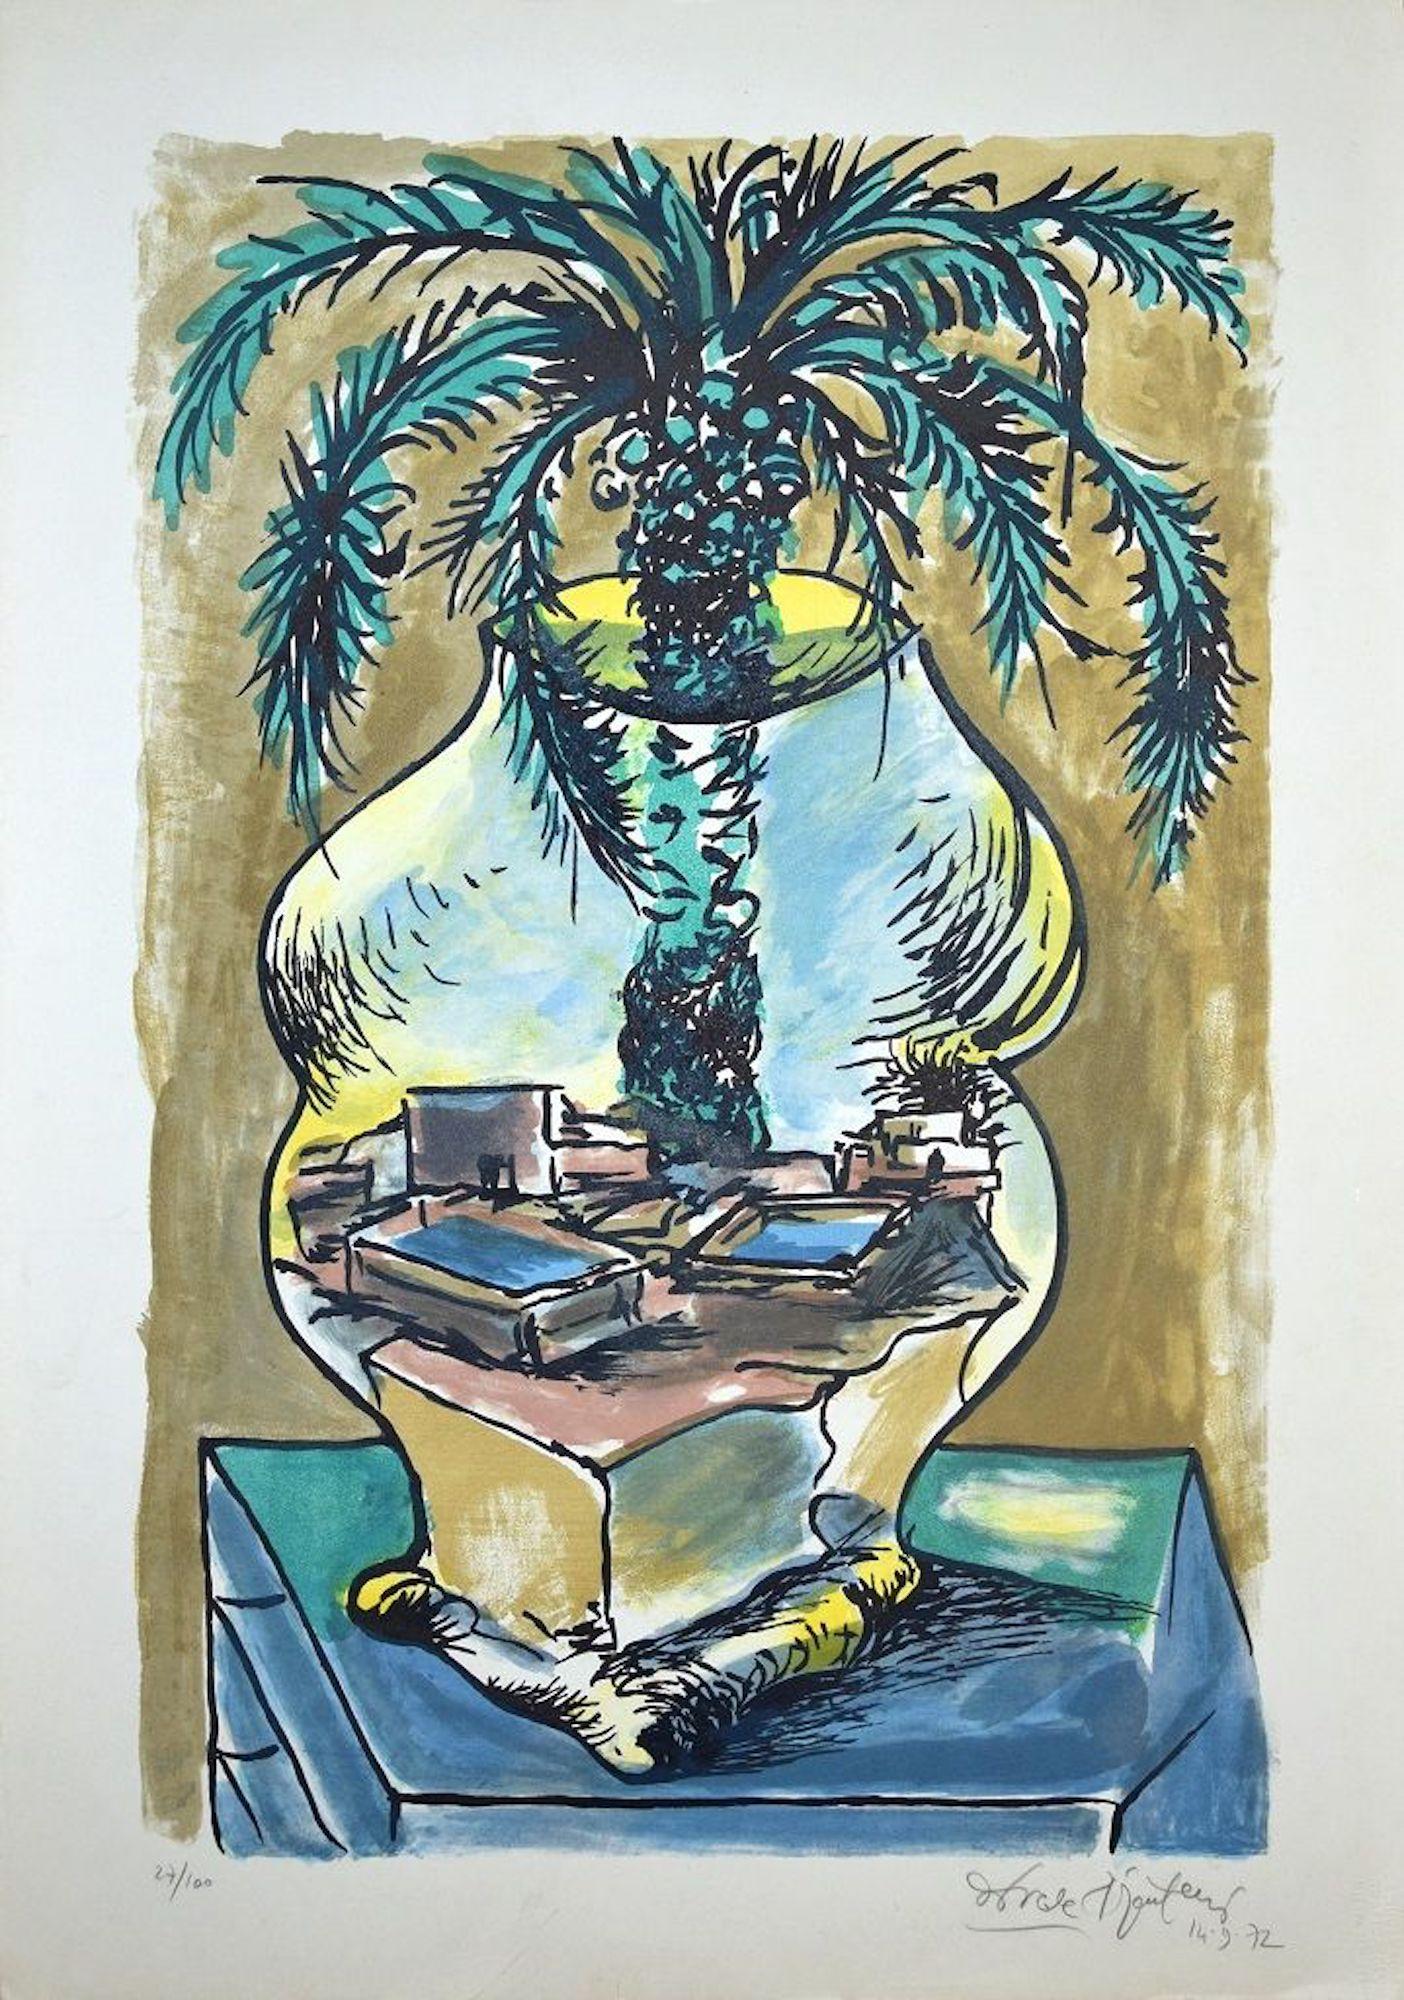 The Vase is an original artwork realized by Ercole Pignatelli in 1972. Colored lithograph.

Hand-signed and dated by the artist in pencil on the lower right. Edition of 100. The artwork is printed by "la nuova foglio s.p.a., label on the back.  Very